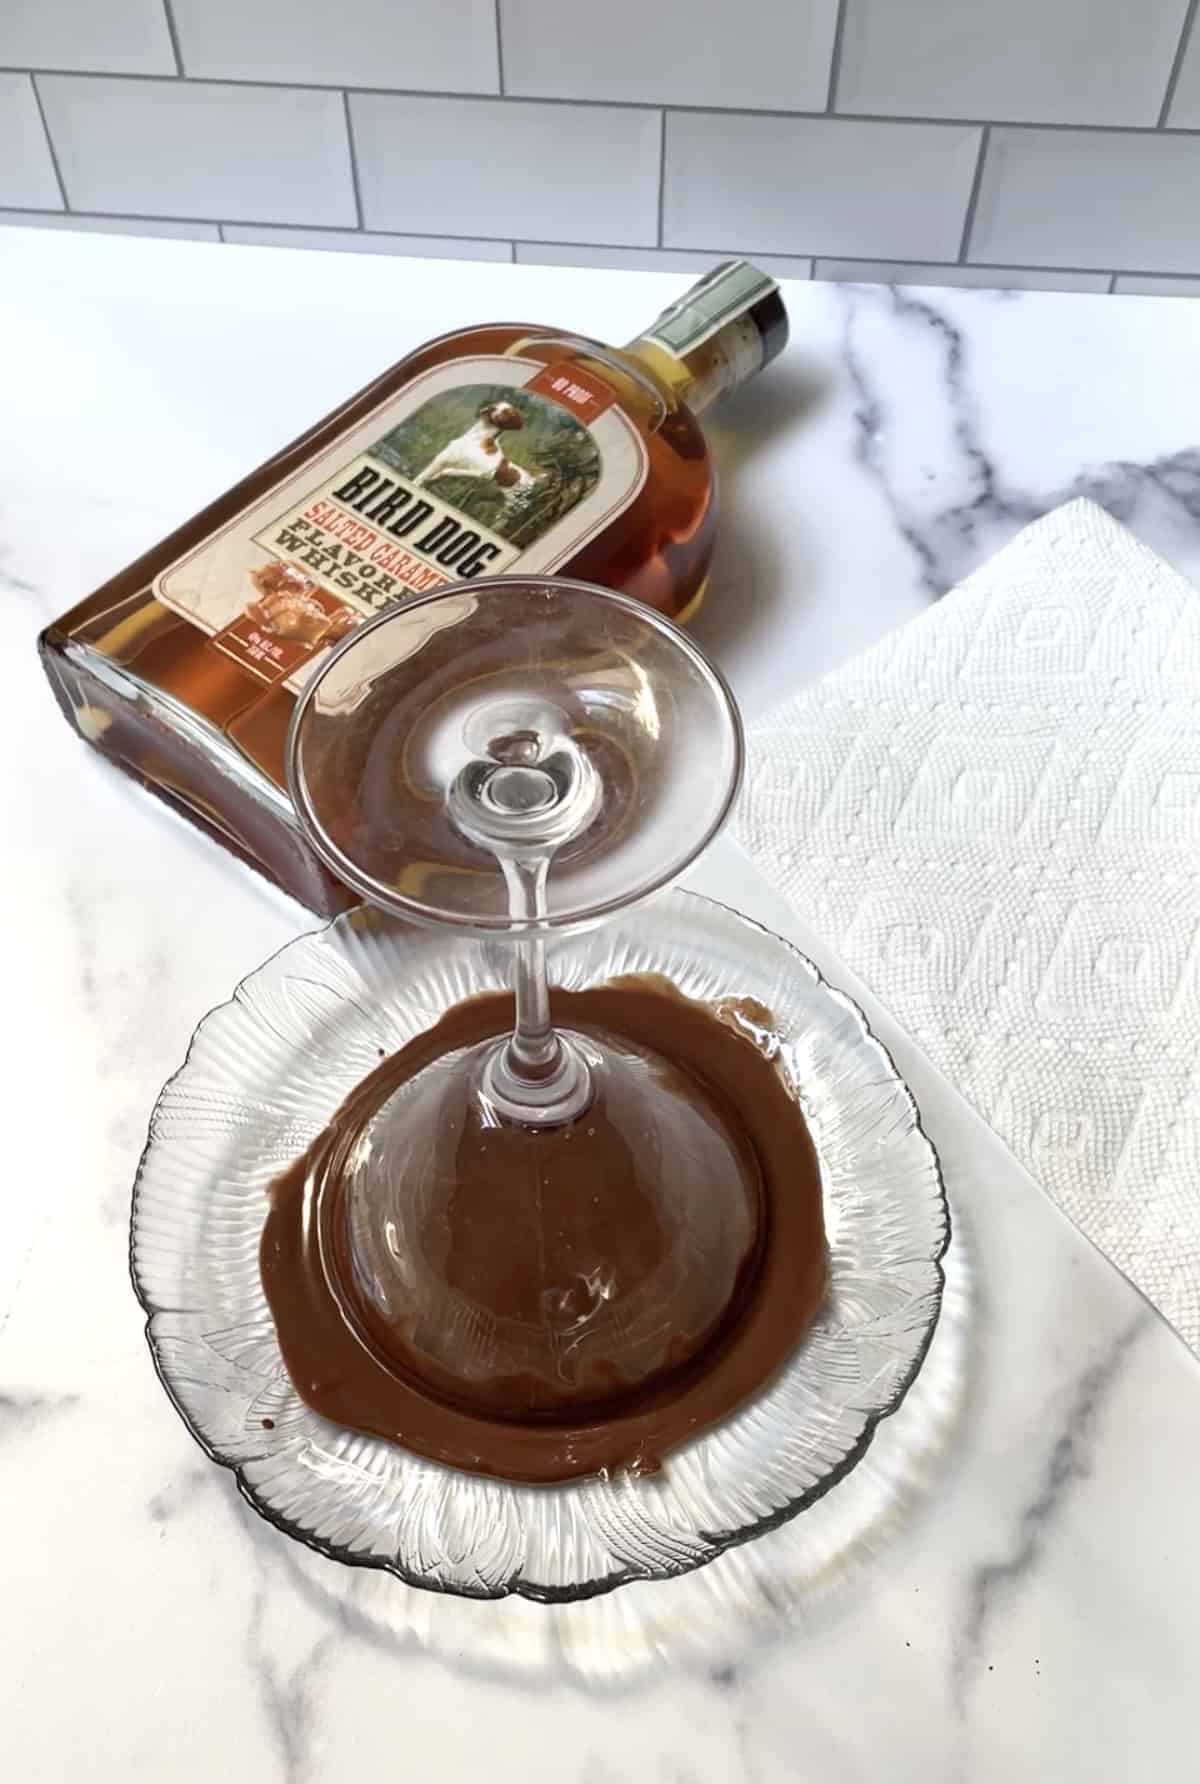 Martini glass upside down on plate of melted chocolate.